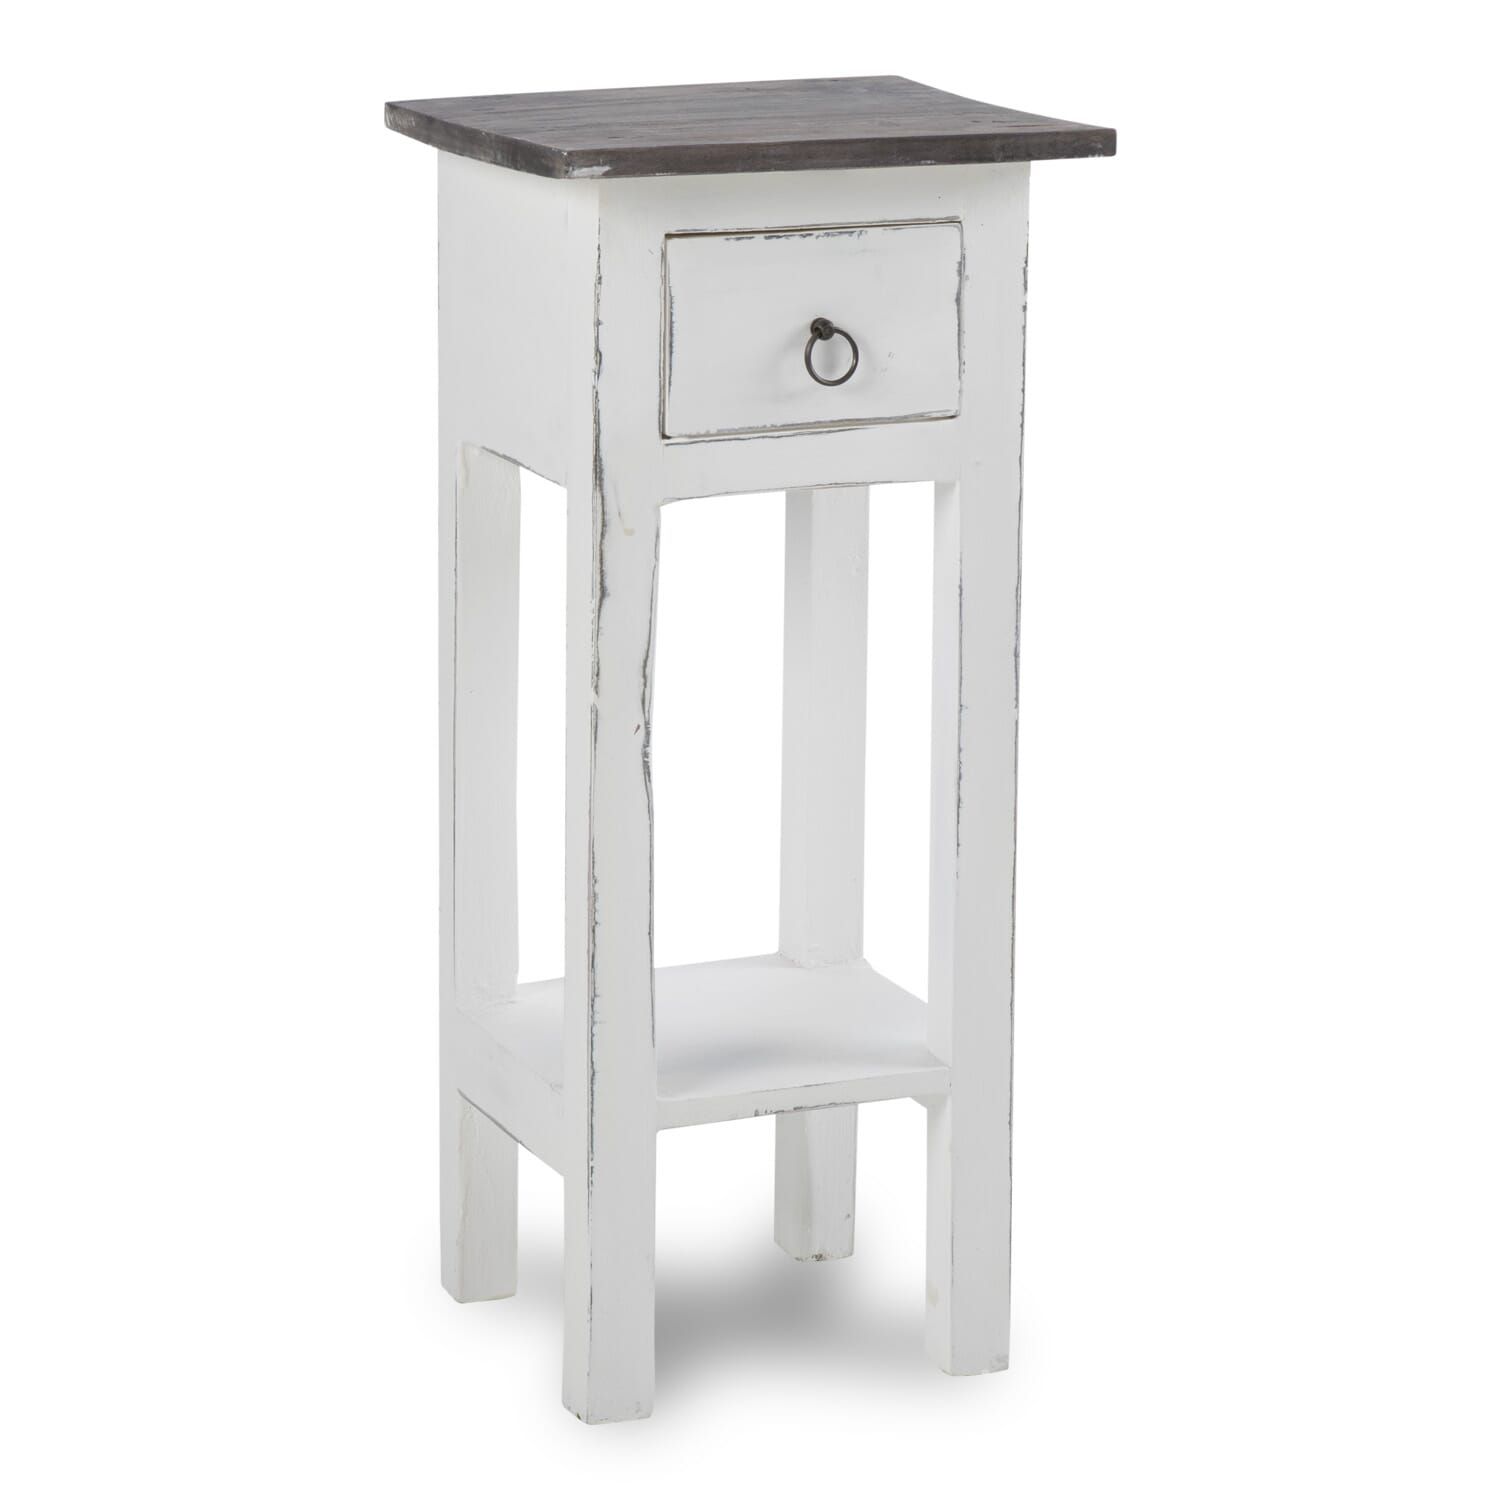 Annabelle White Wash Side Table | Accent Furniture | Wg&r Furniture Throughout White Washed Wood Accent Stools (View 18 of 20)